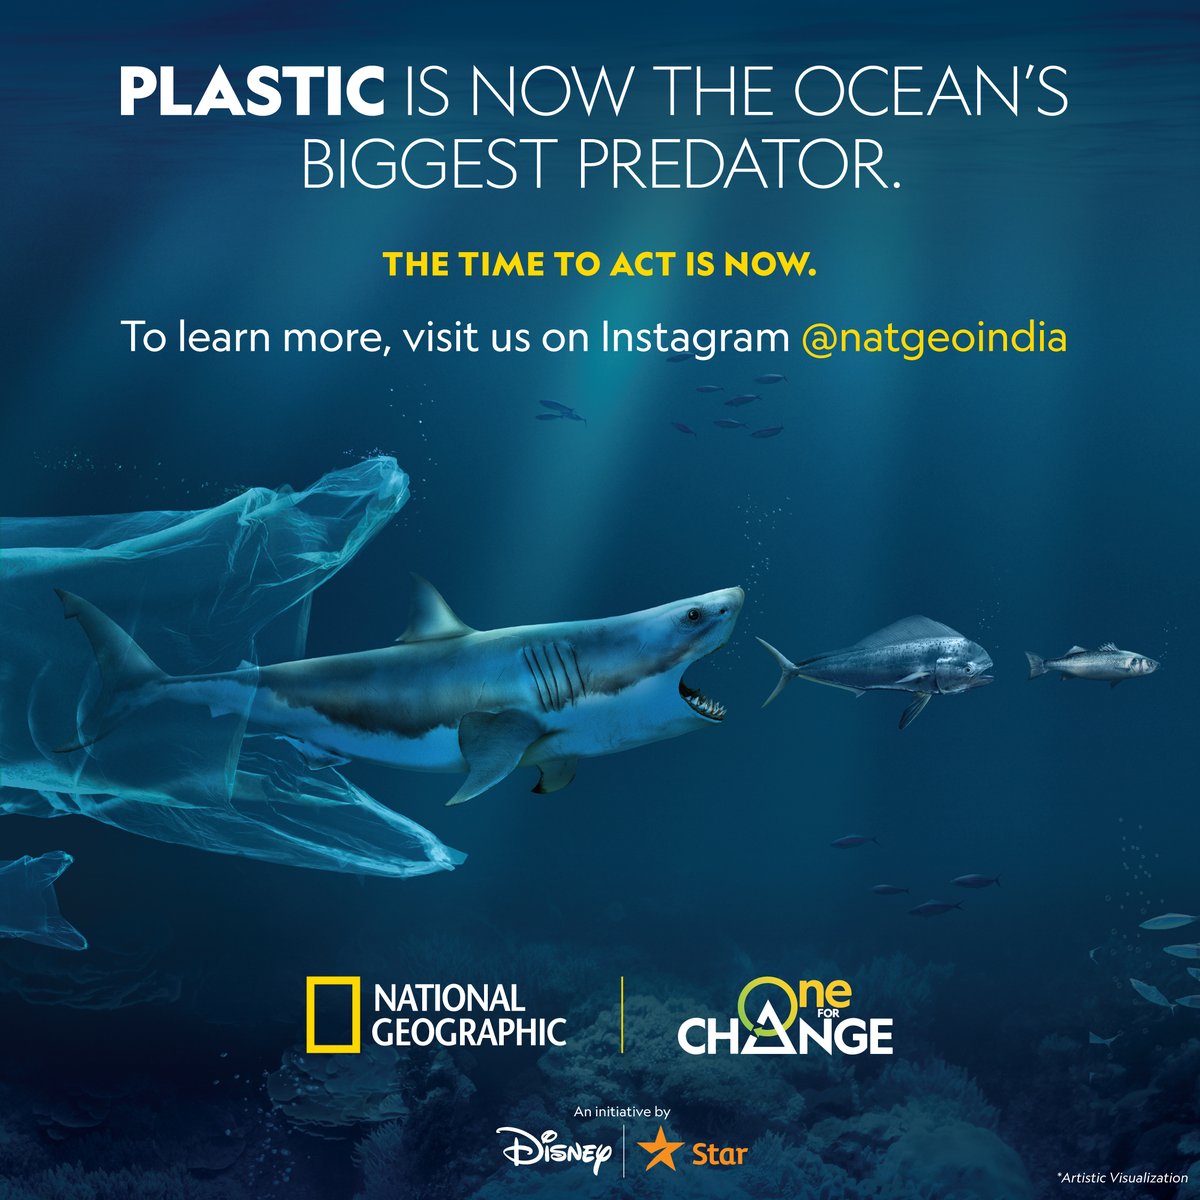 The Earth’s biggest predator is now plastic. 
Presenting “One for Change,” our latest campaign for Nat Geo where we promote sustainable living to protect our planet’s future. 
#NewWork #Infectious #NatGeo #Sustainable